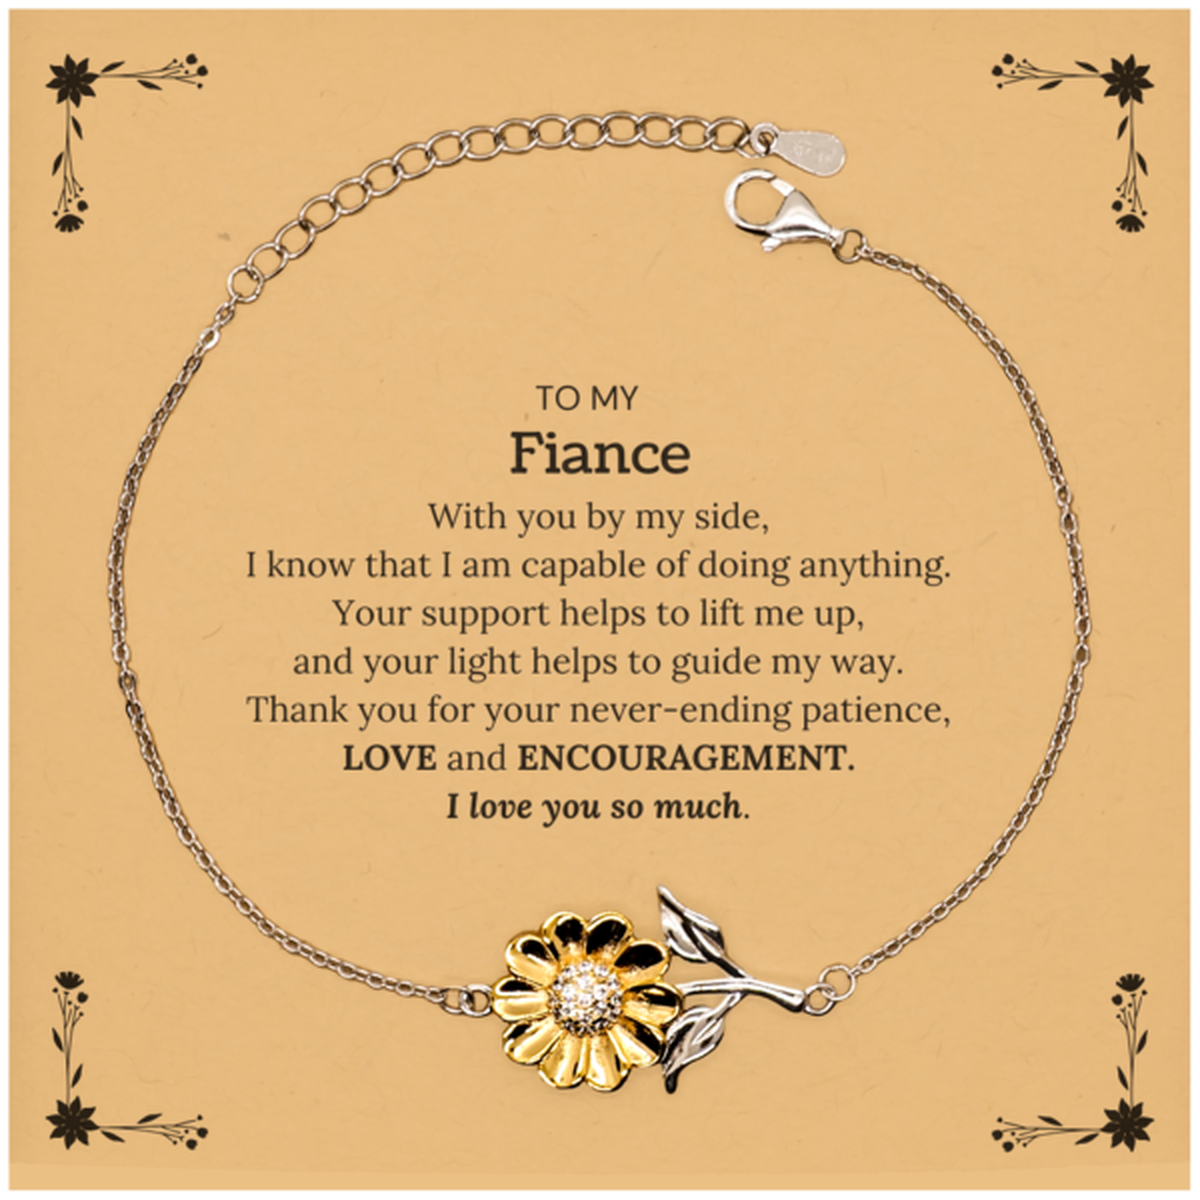 Appreciation Fiance Sunflower Bracelet Gifts, To My Fiance Birthday Christmas Wedding Keepsake Gifts for Fiance With you by my side, I know that I am capable of doing anything. I love you so much